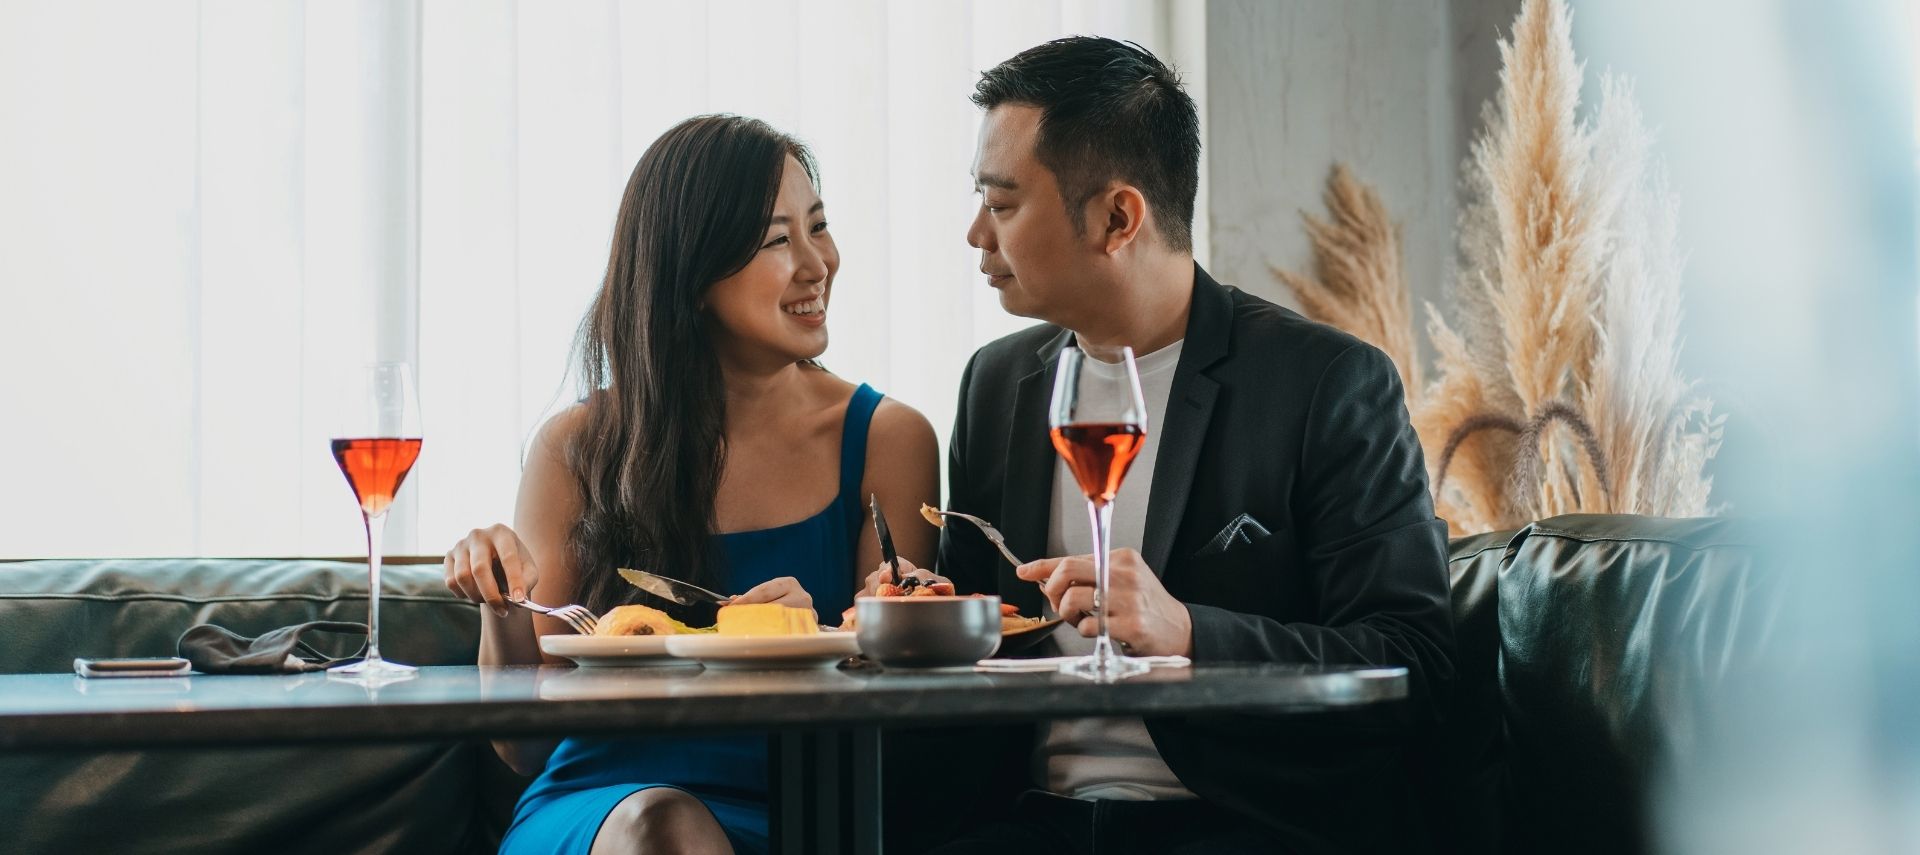 a couple is dining out with glasses of wine on the table